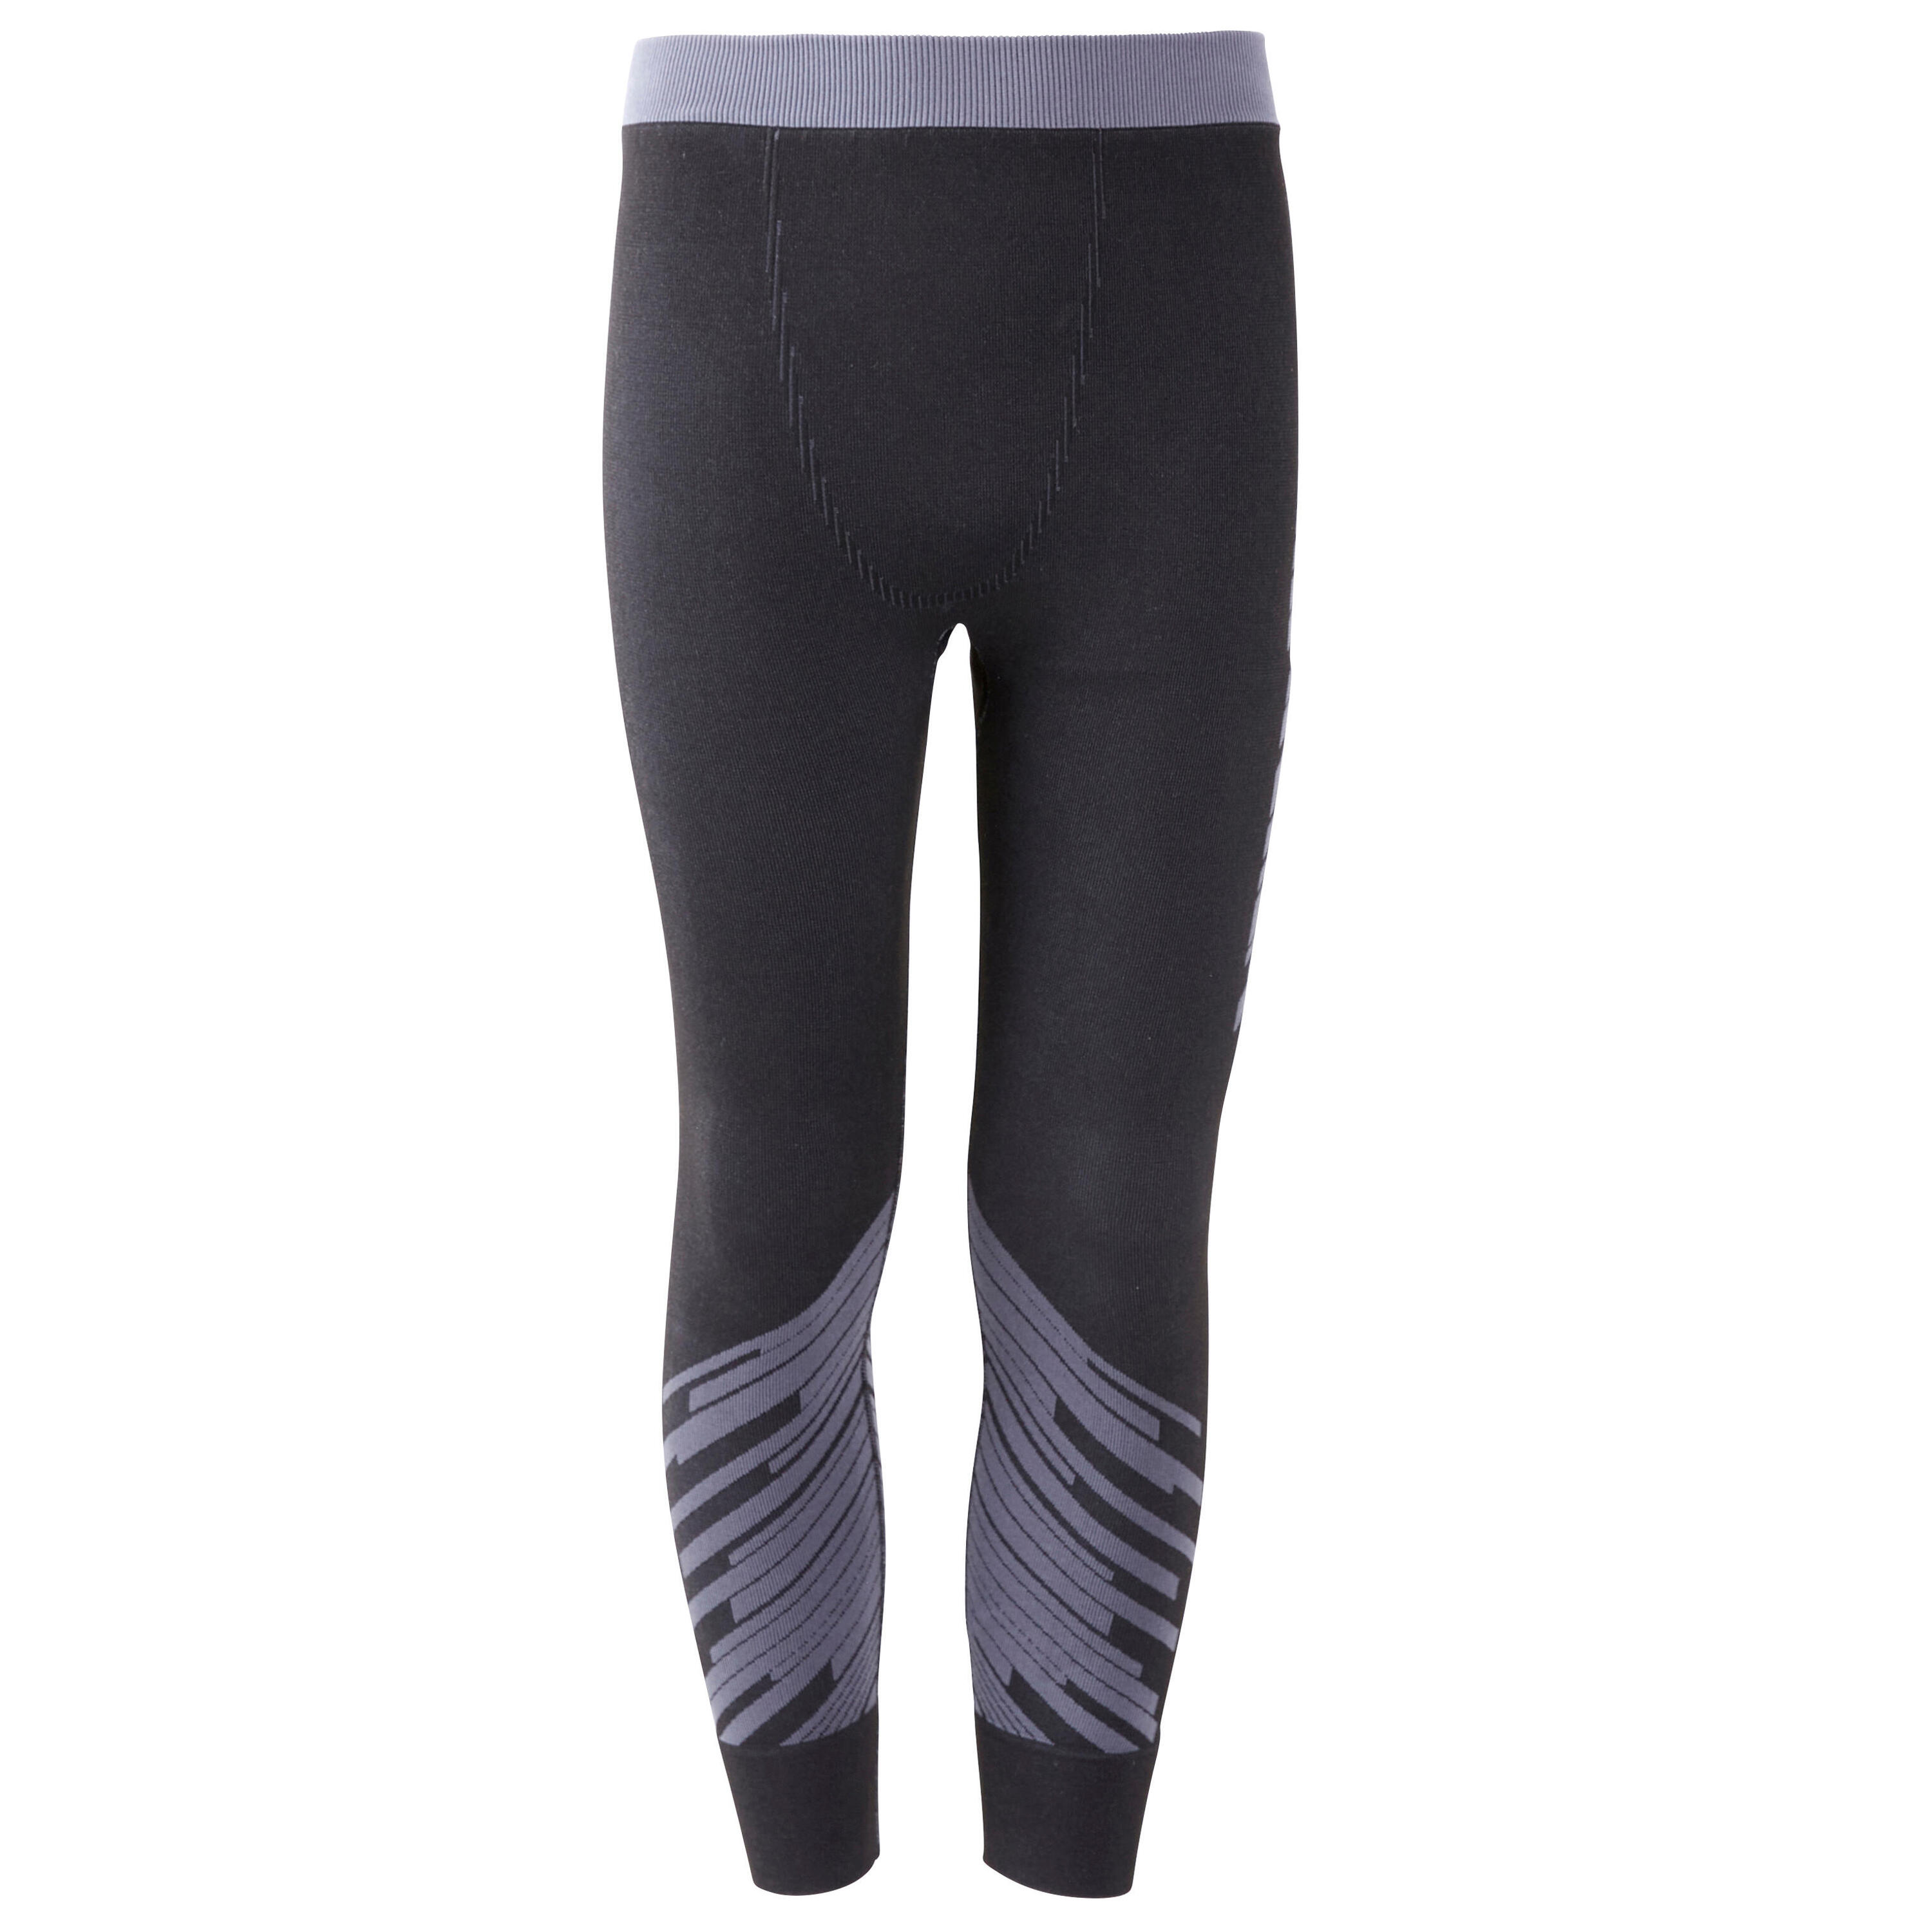 Boys' Super Thermal Compression Leggings - Navy Eclipse/Navy